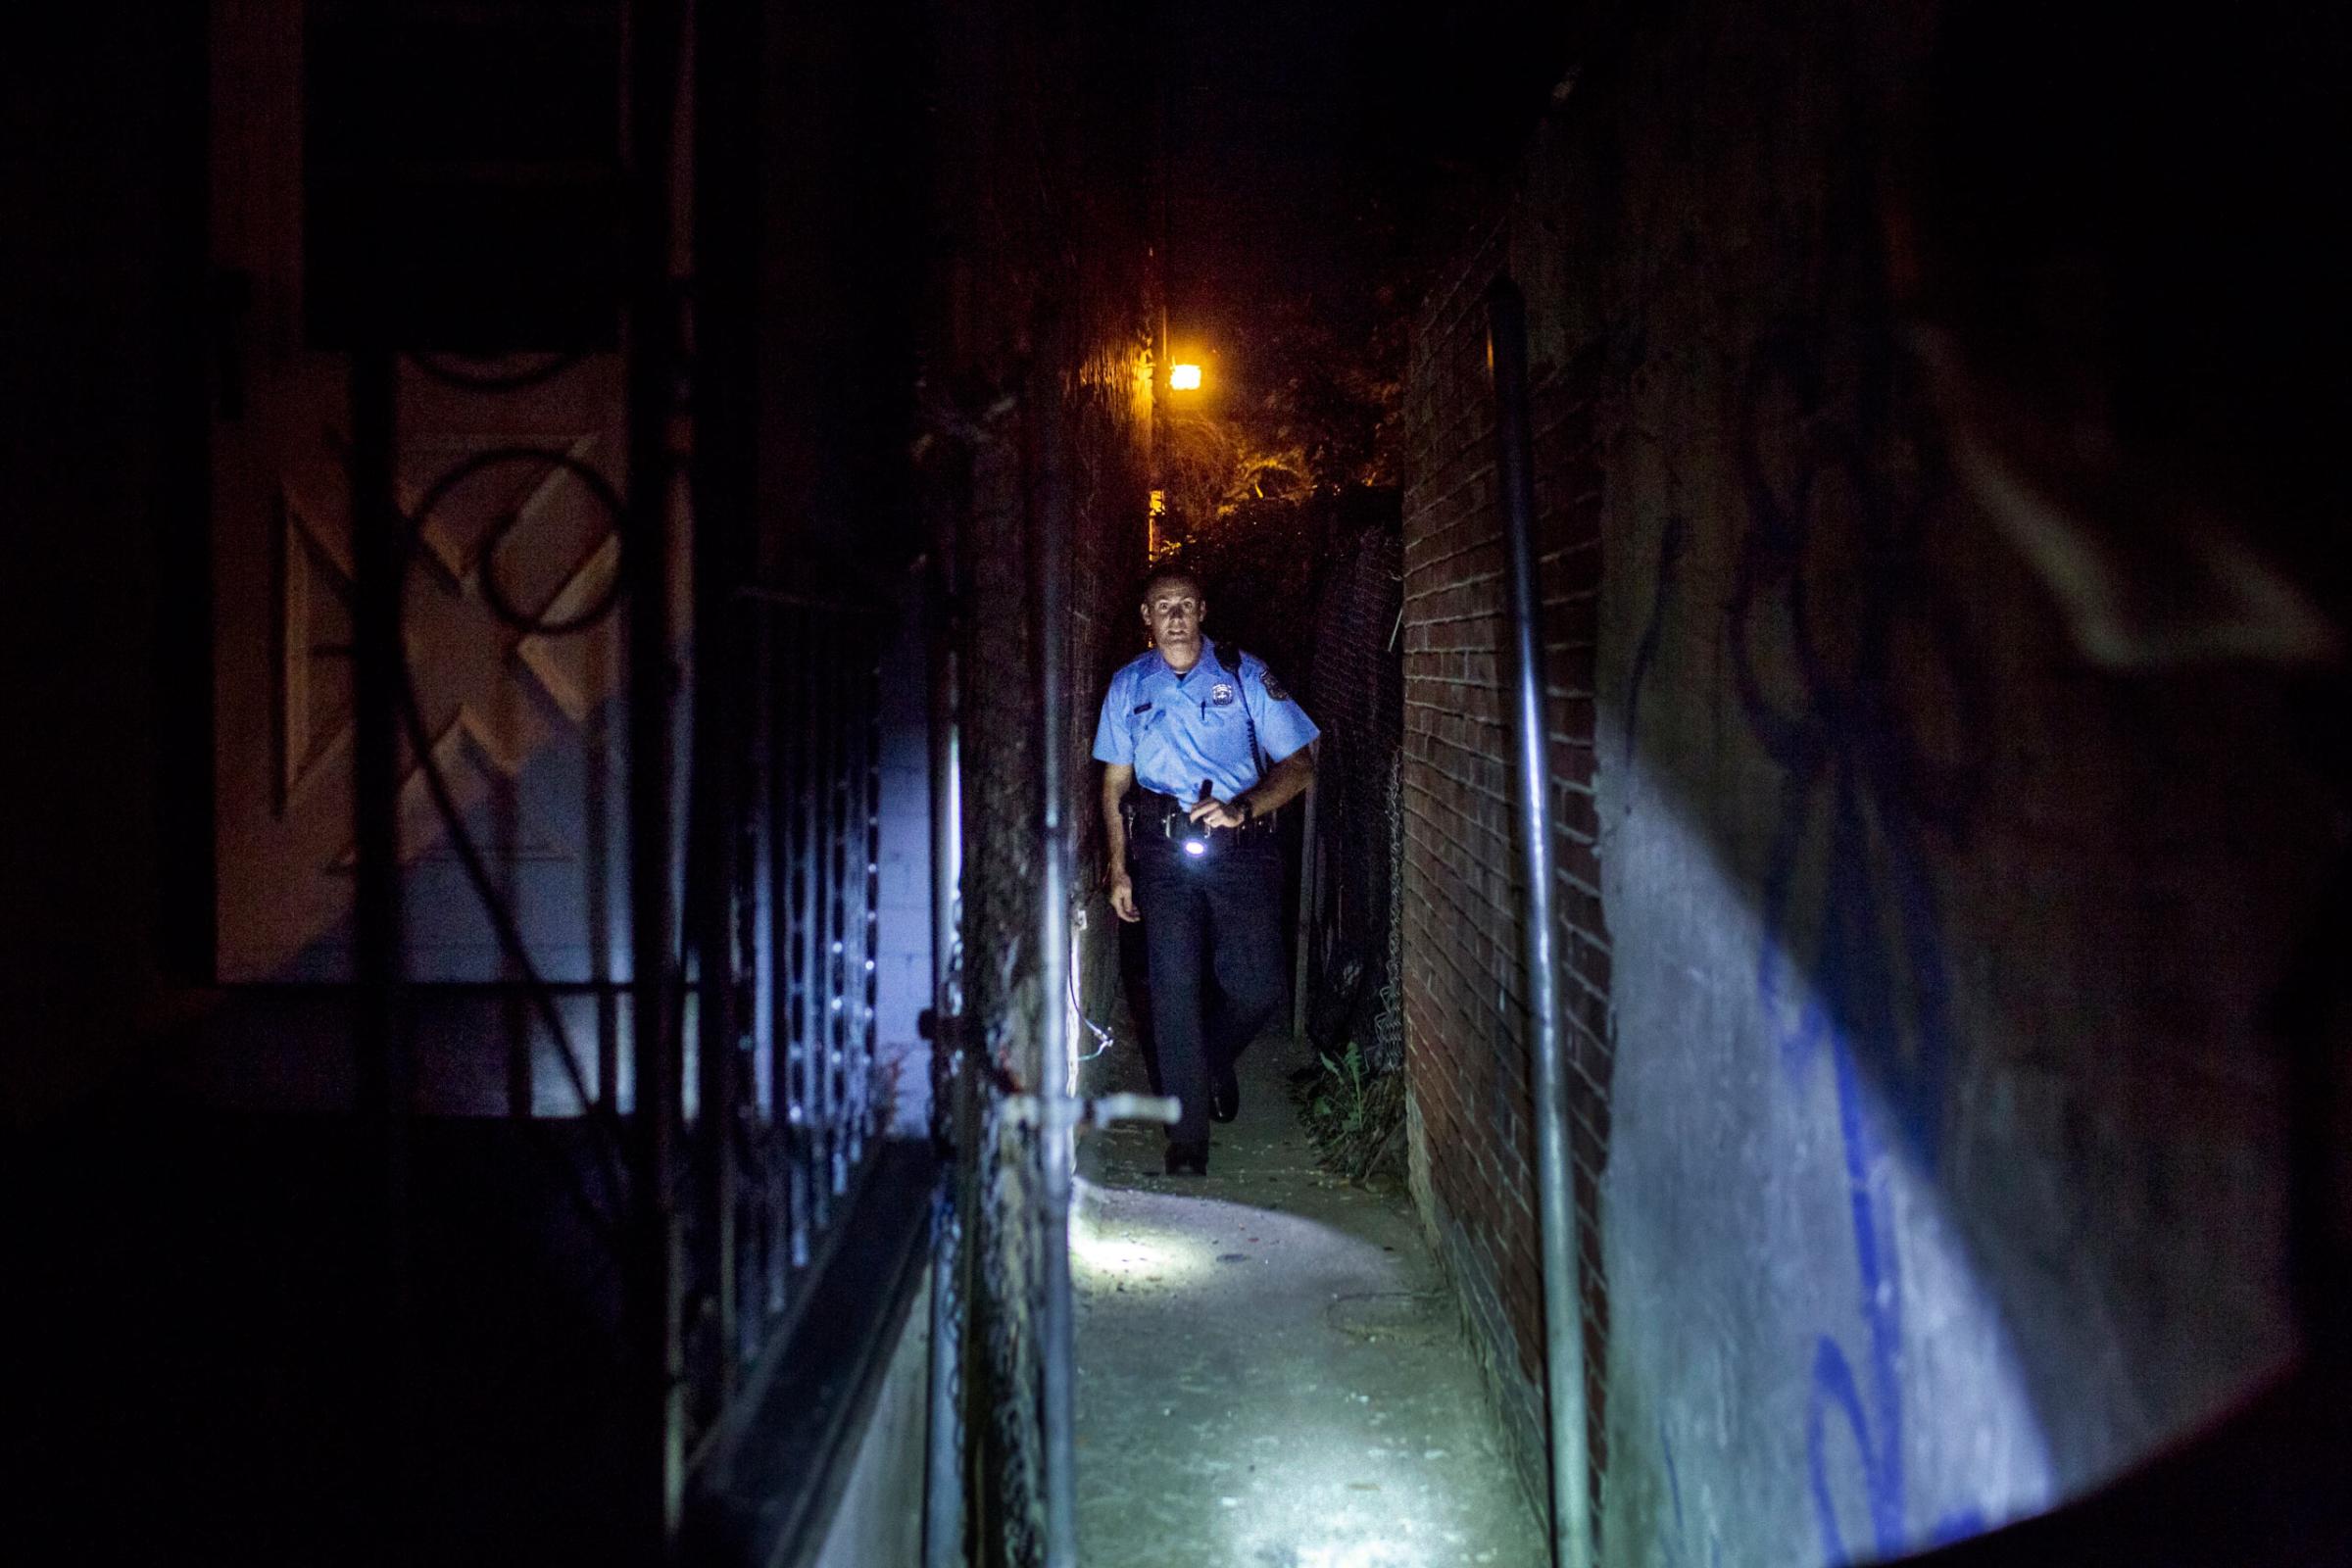 July 31st, 2015. Philadelphia.  Officer , Richard O'Brien searches an alley where a suspect had fled previously, searching for evidence he might have dropped items like drugs or weapons. He found nothing.